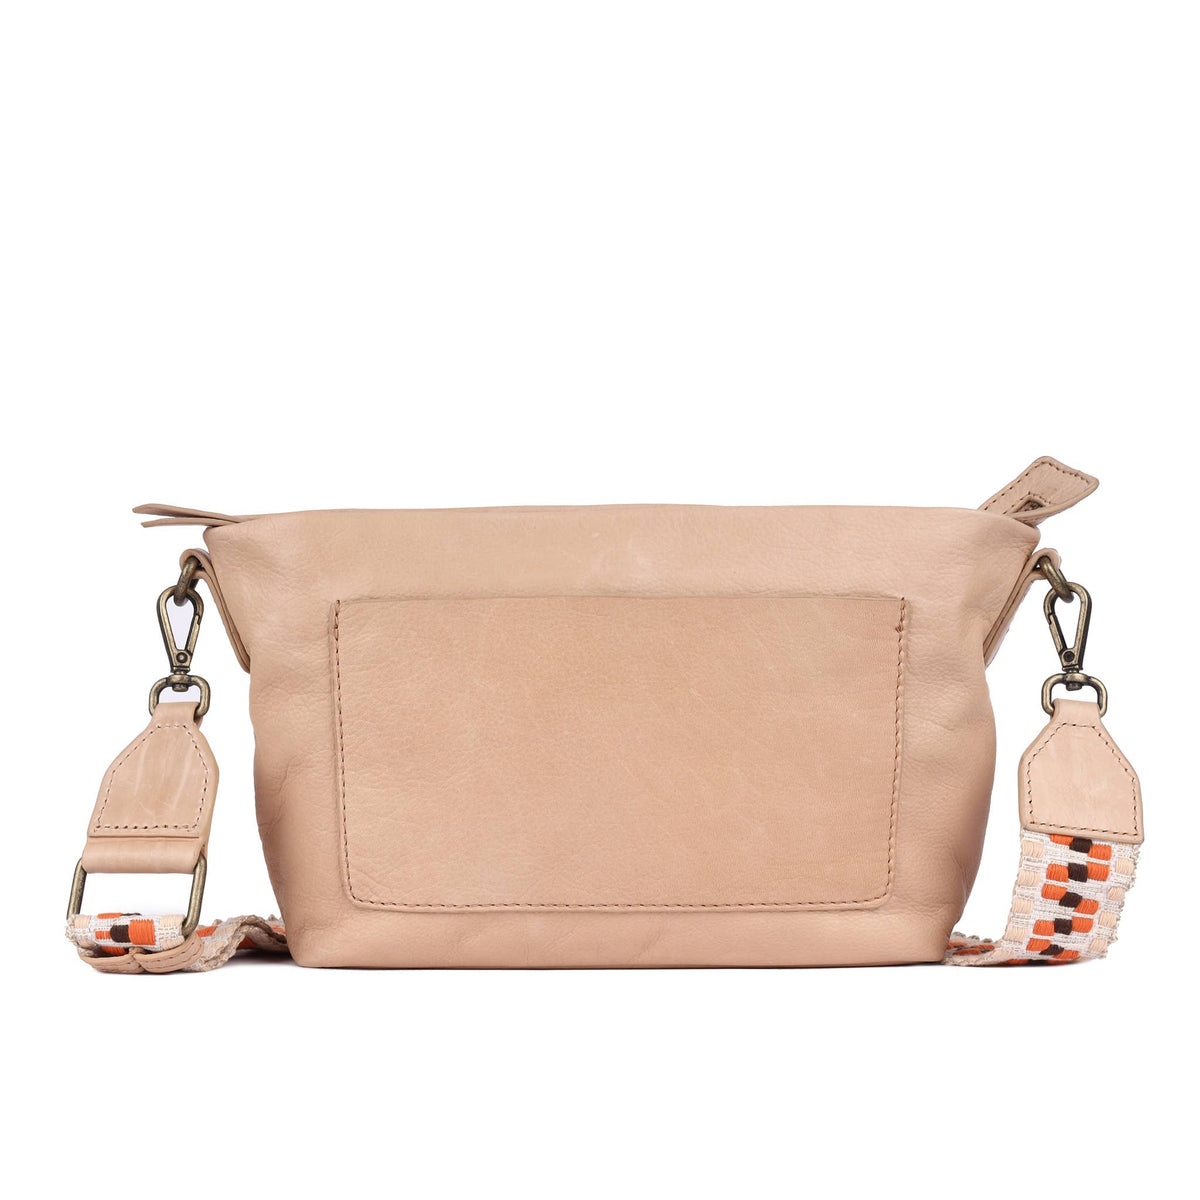 Latico Leathers Aquarius Handcrafted Leather Crossbody Bags - Camel